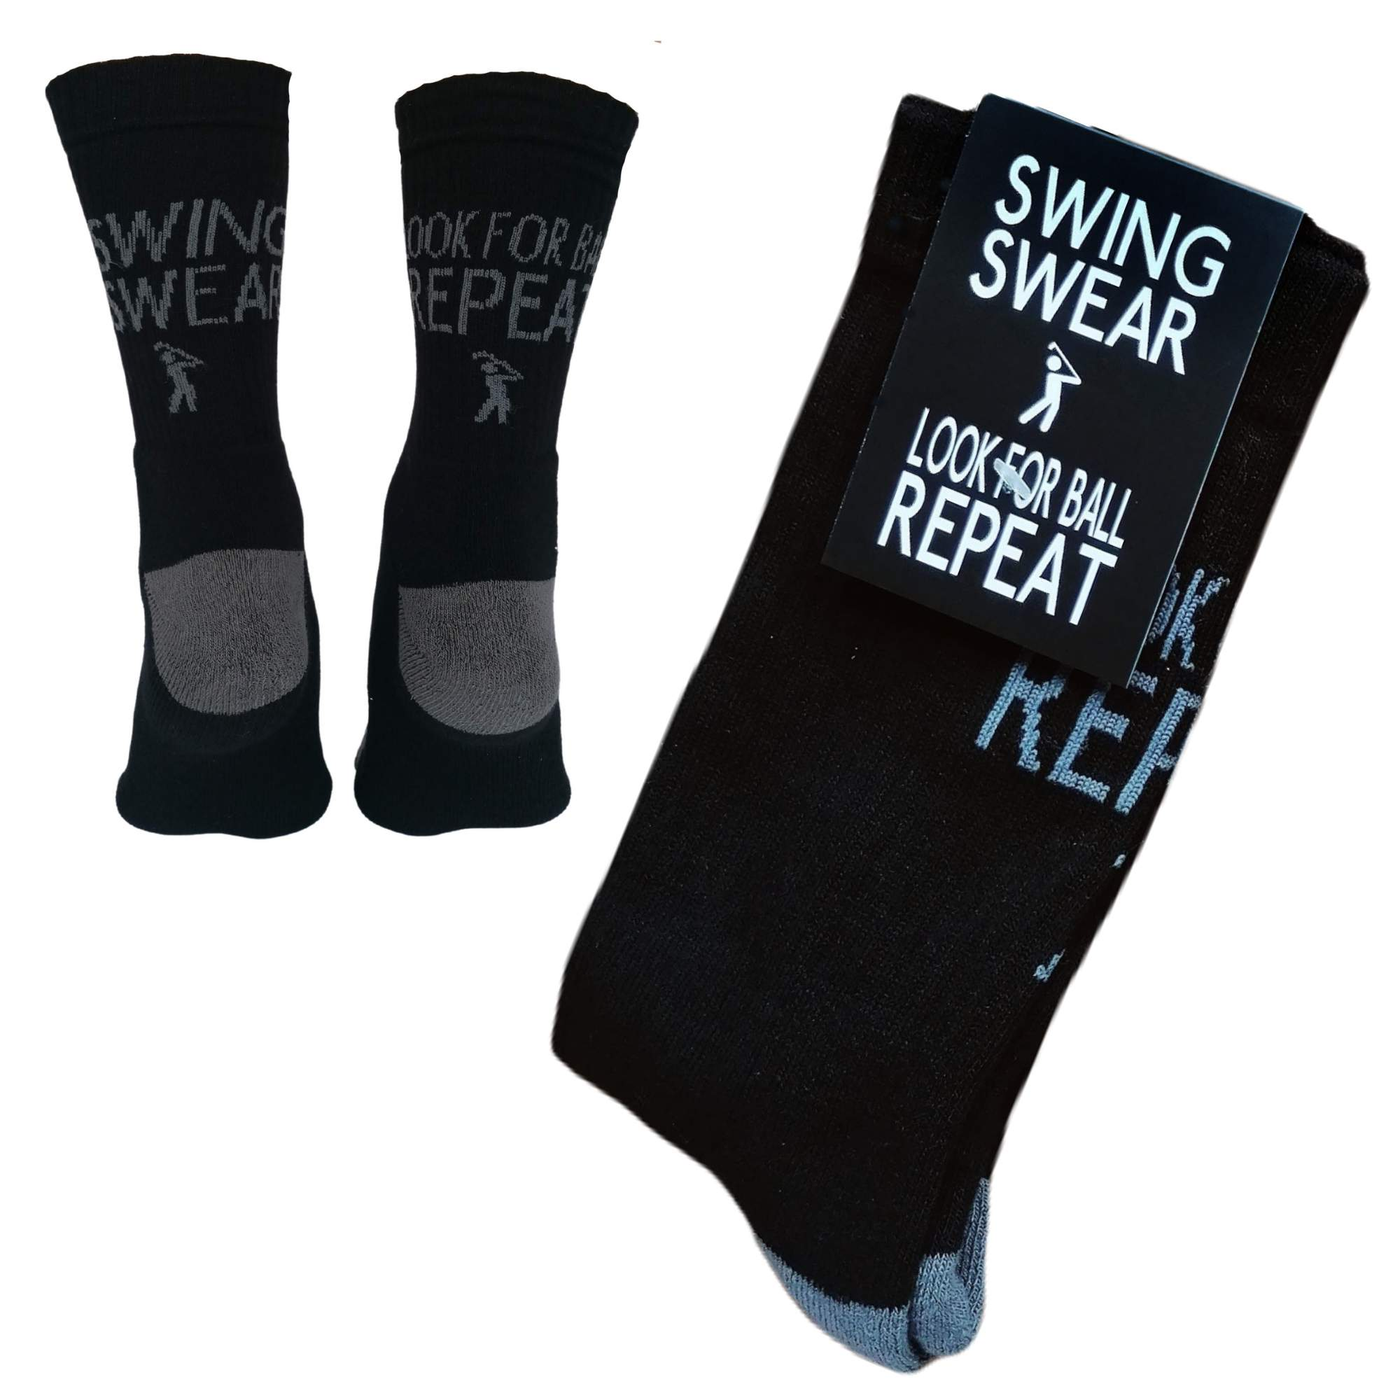 Swing Swear Look for Ball Repeat  - Socks-Worry Less Design-Golf,Golf-Gift,outlet,Socks